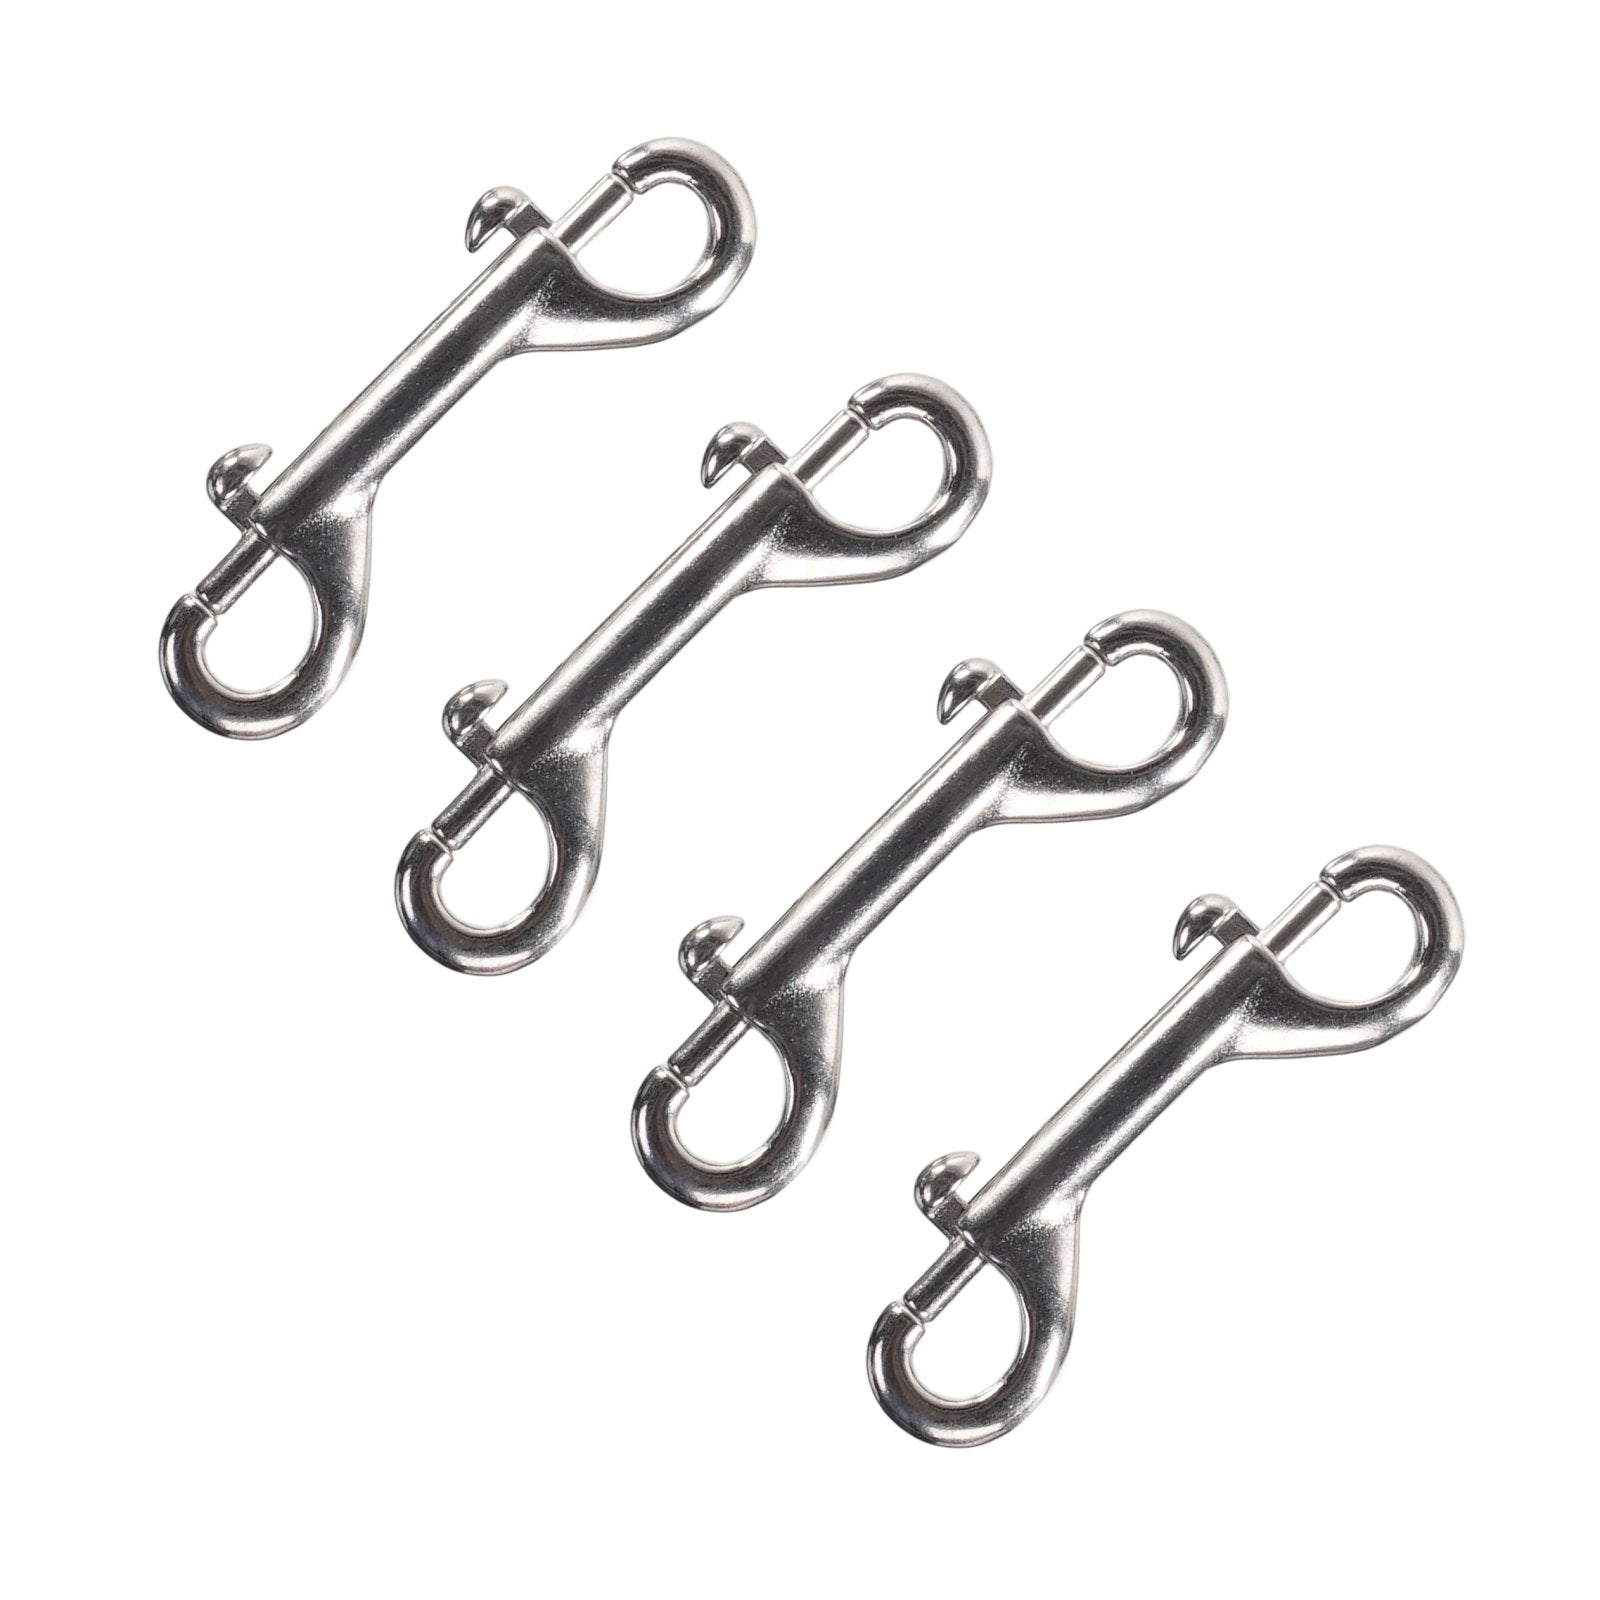 Core By Kink 4pack Stainless Steel Double Hook - Kink Store